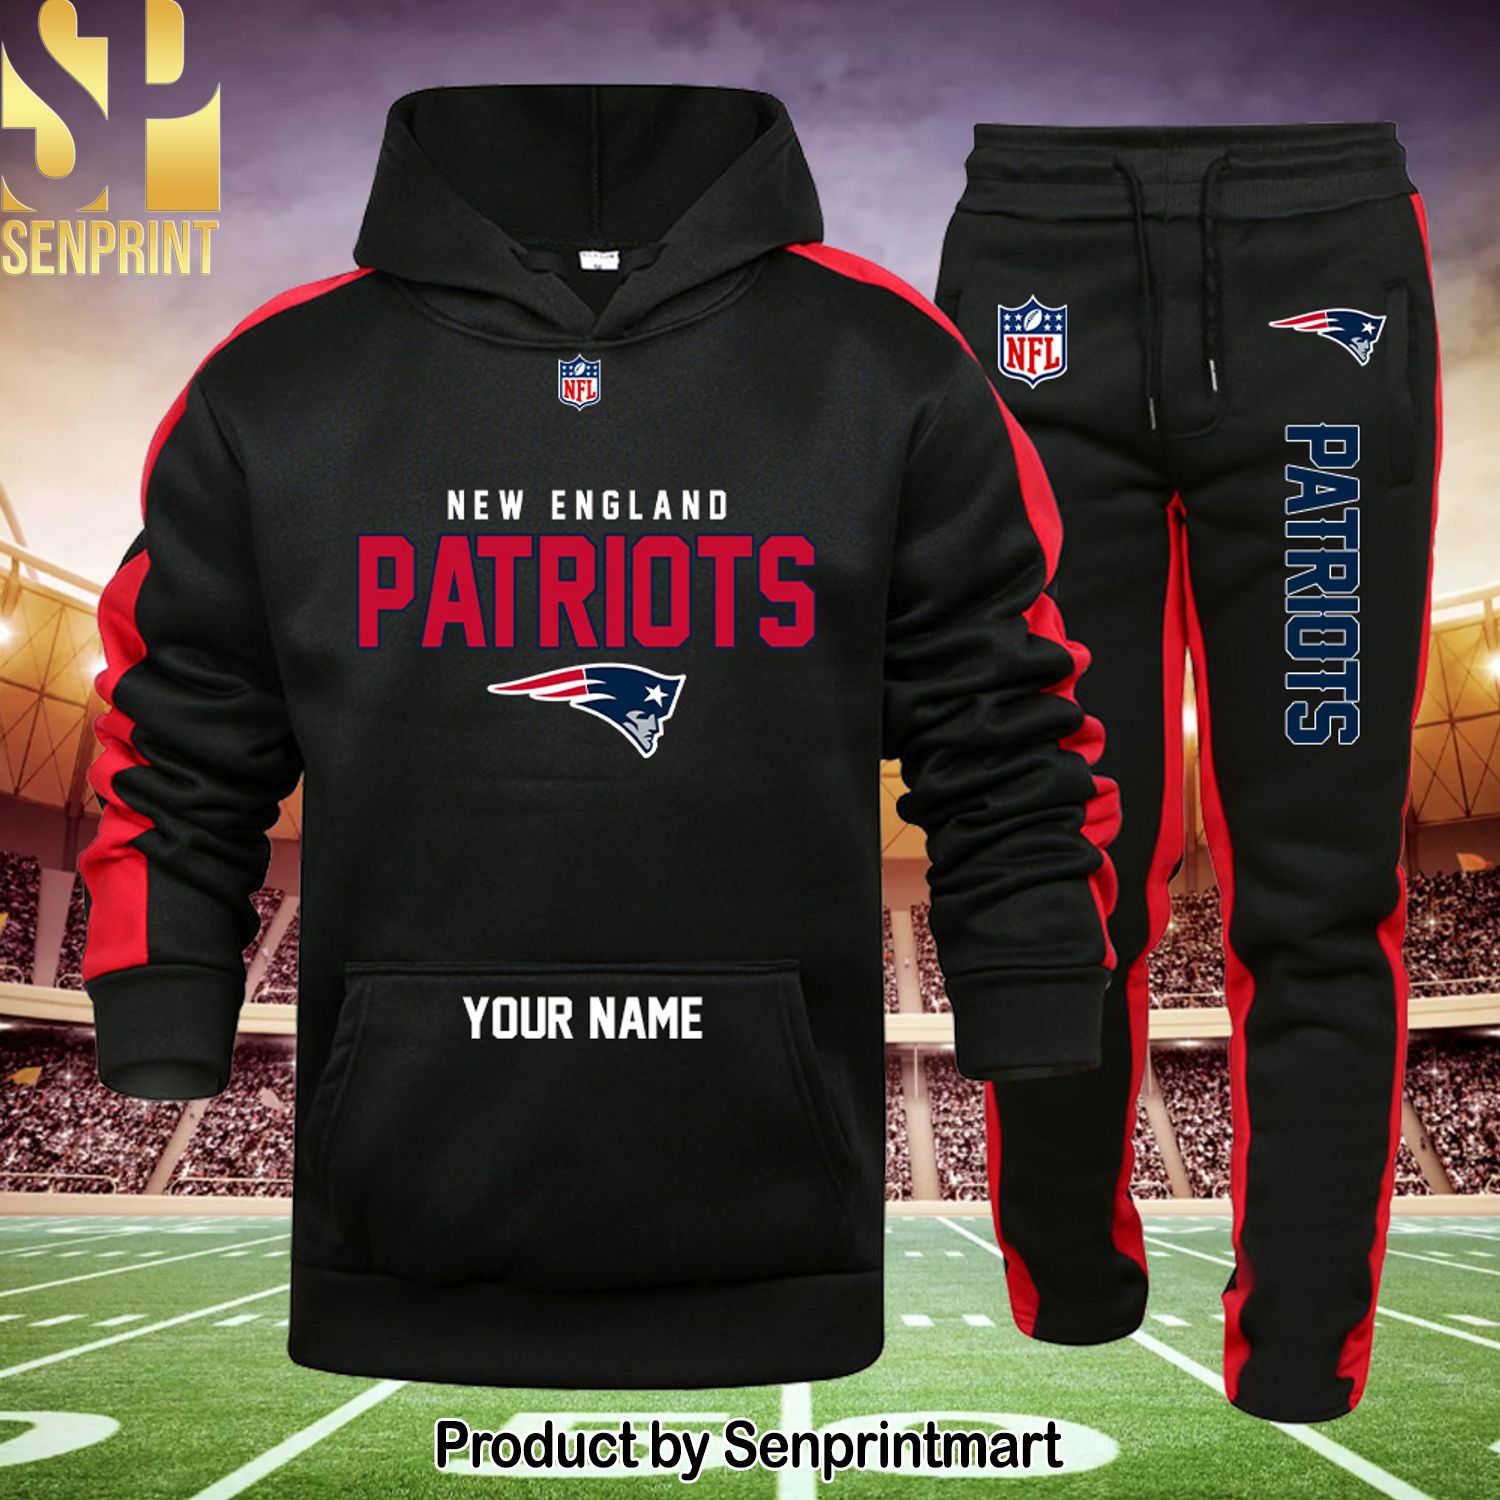 NFL New England Patriots All Over Printed 3D Shirt and Sweatpants